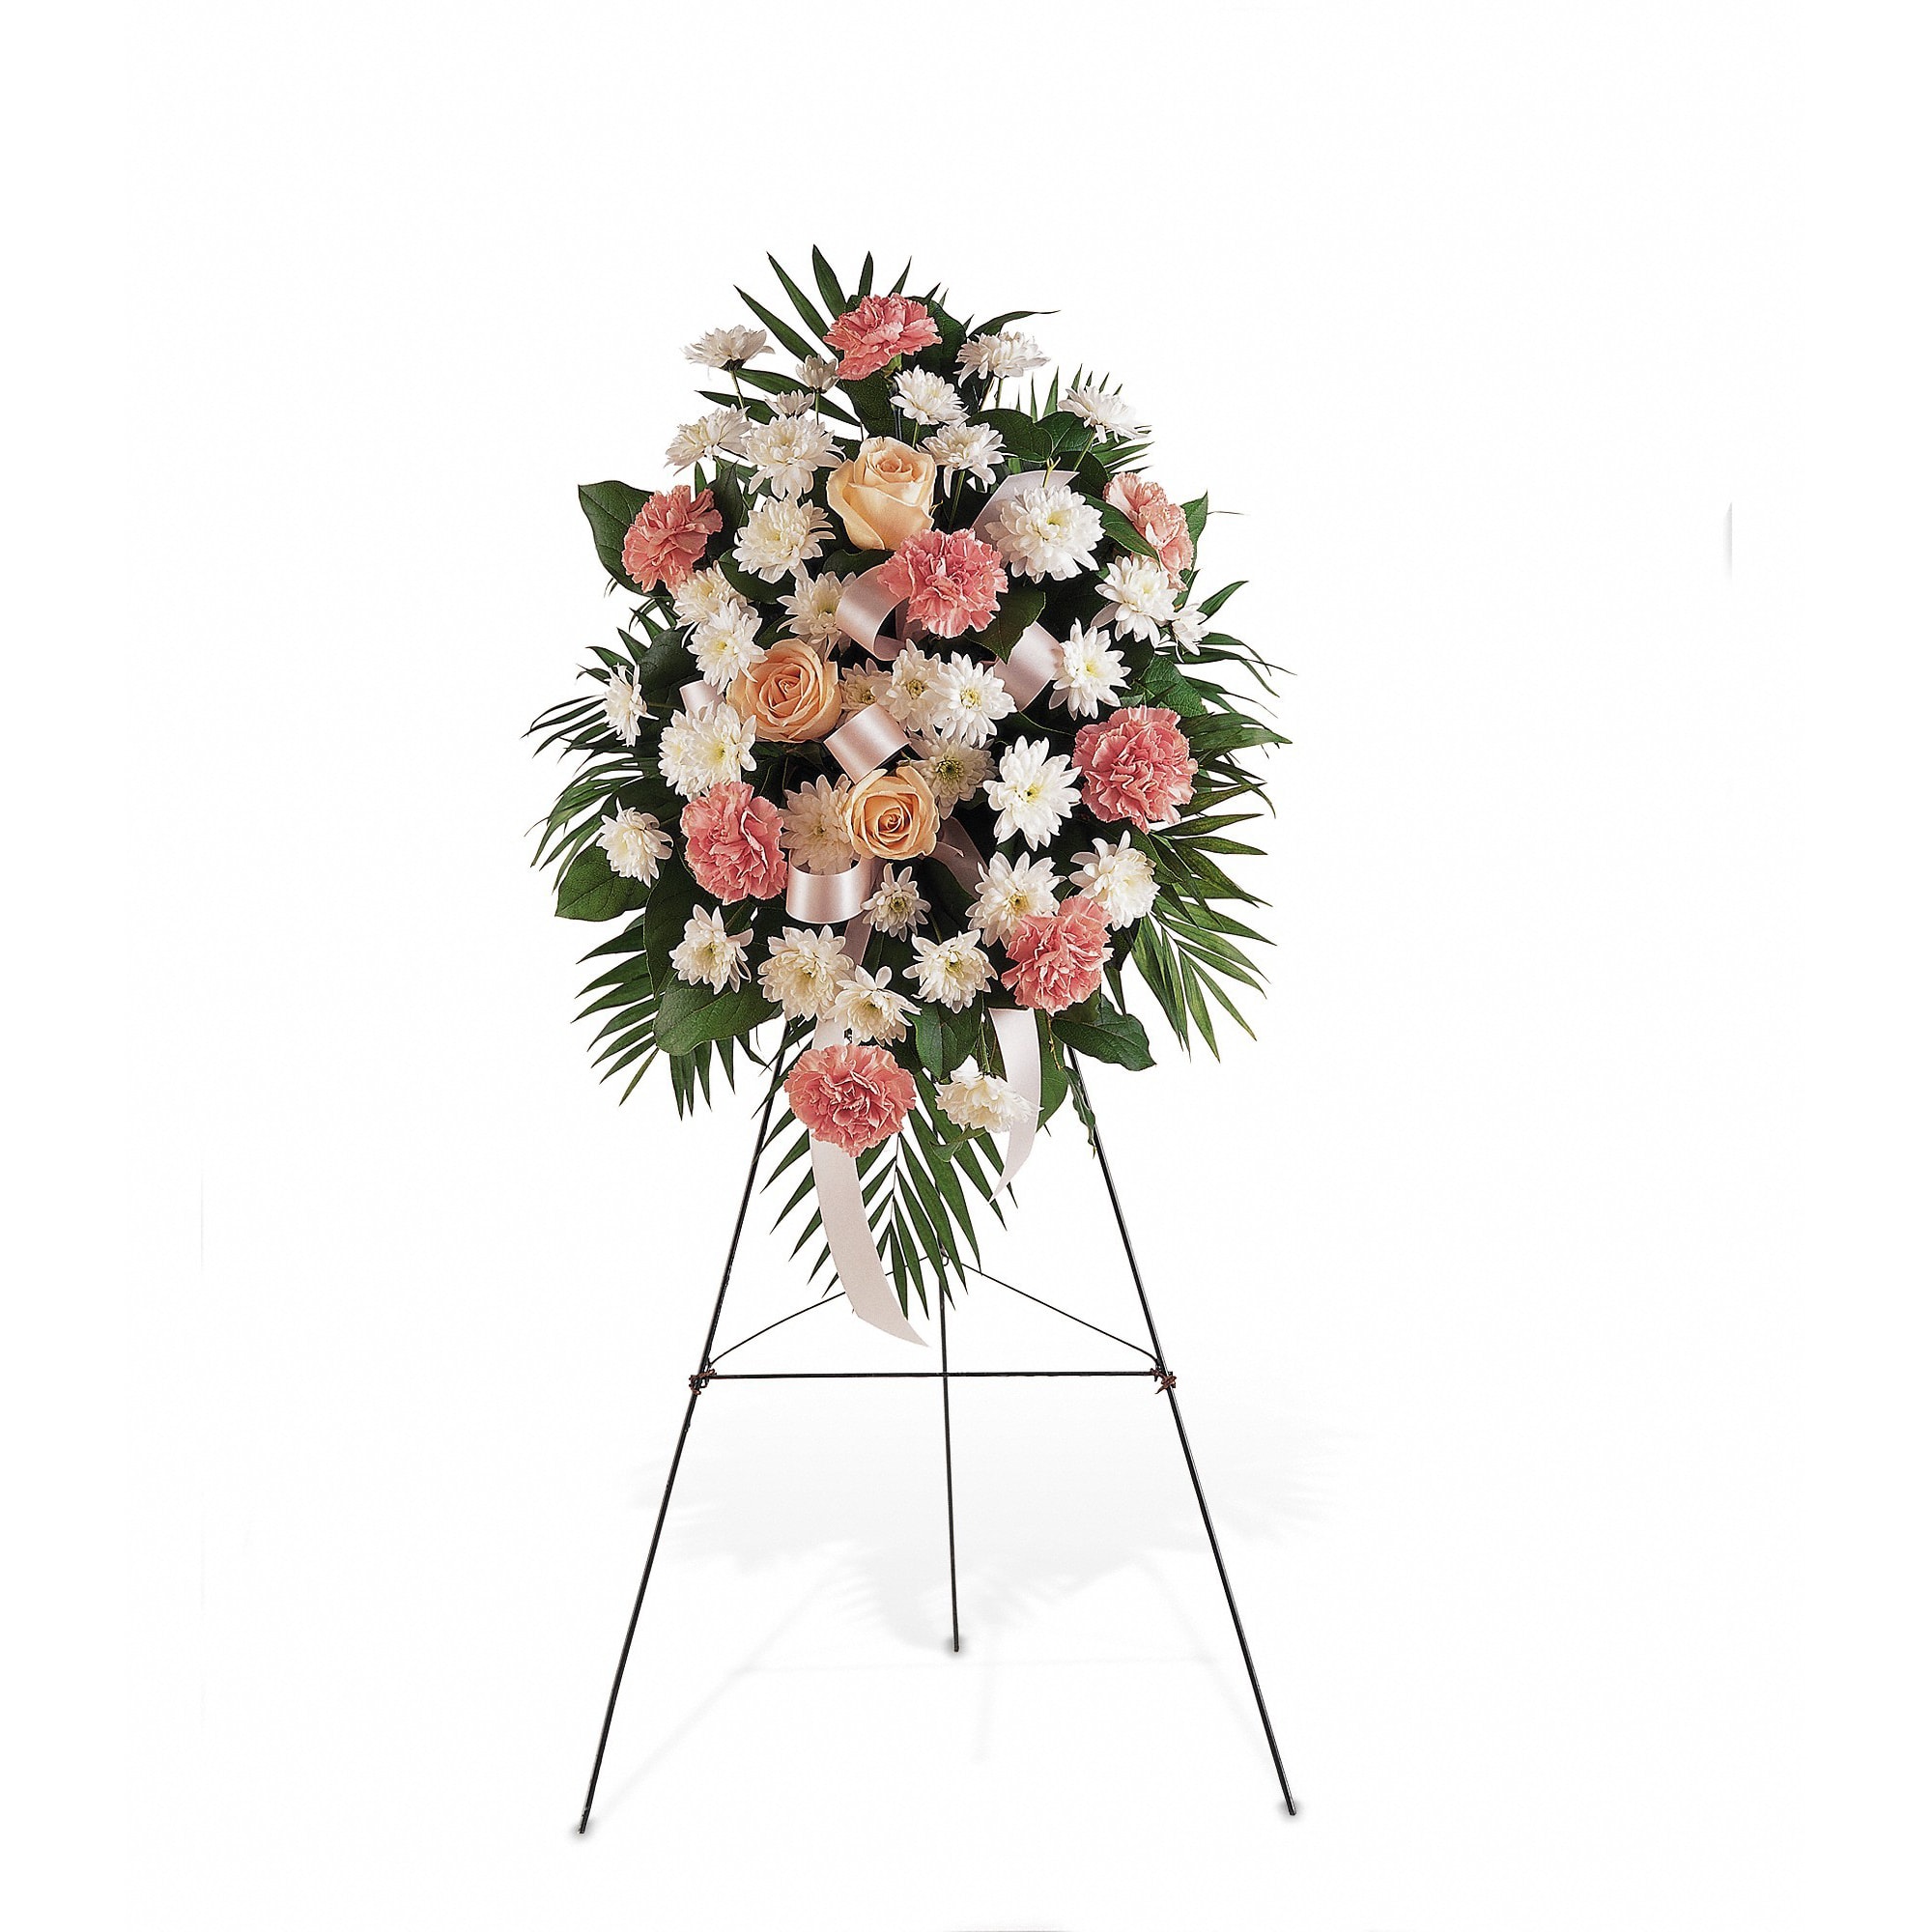 Gentle Thoughts Spray  - The pink and white flowers of this lovely spray will express your deepest sympathy ever so gently to all in attendance. 